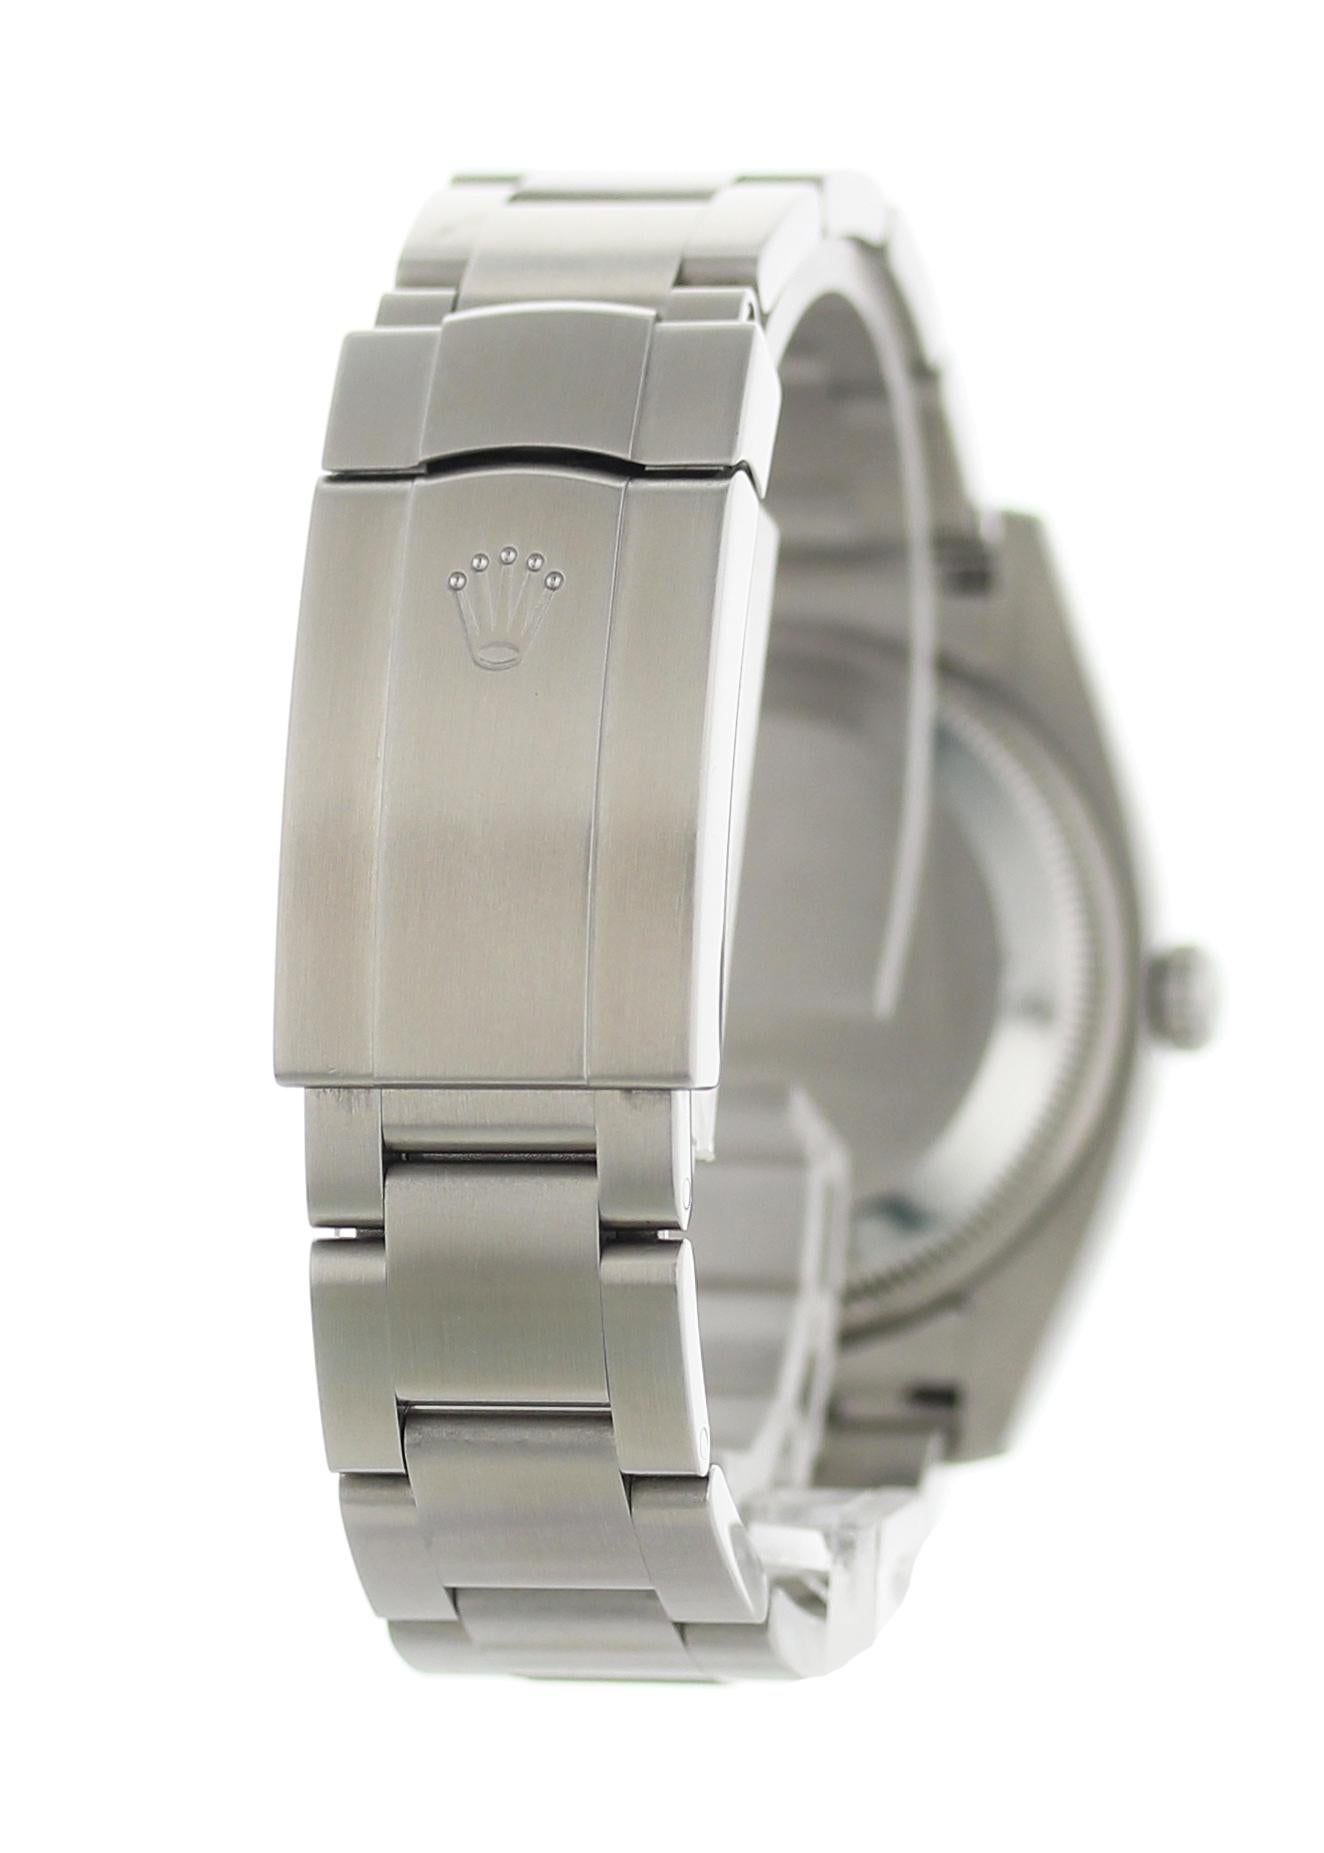 Rolex Oyster Perpetual Air-King 114200 In Excellent Condition For Sale In New York, NY